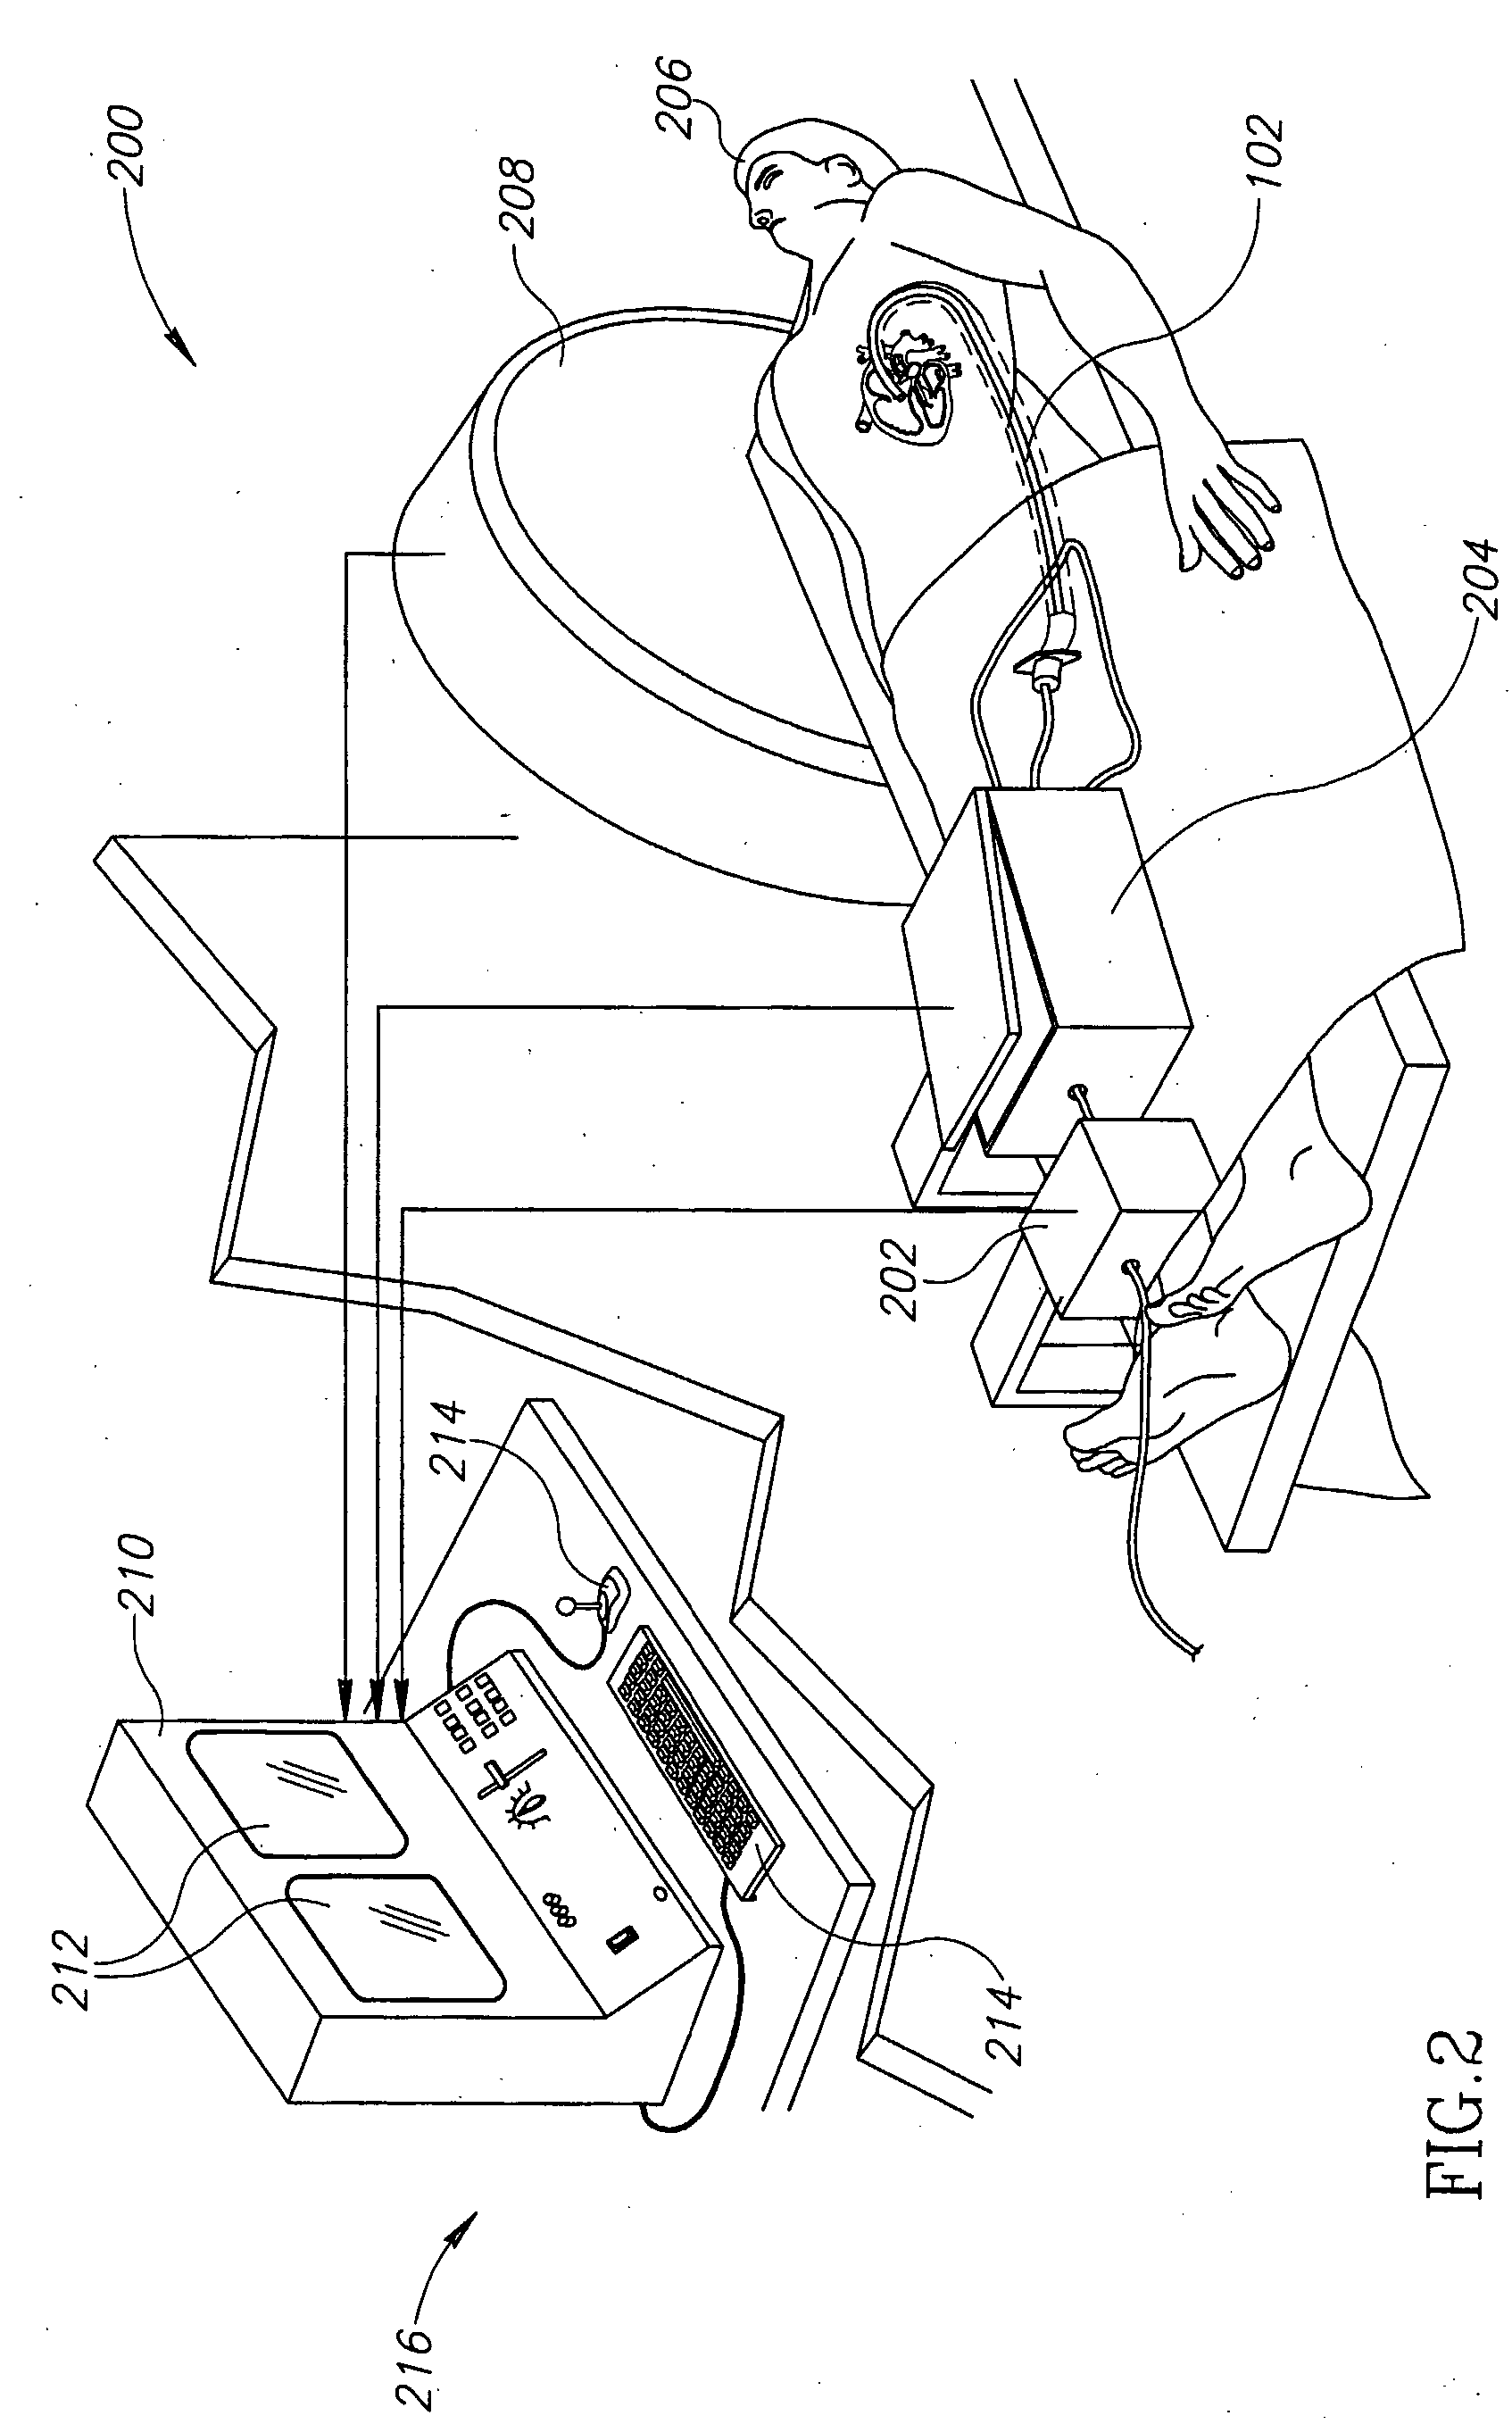 Methods and apparatuses for treatment of hollow organs